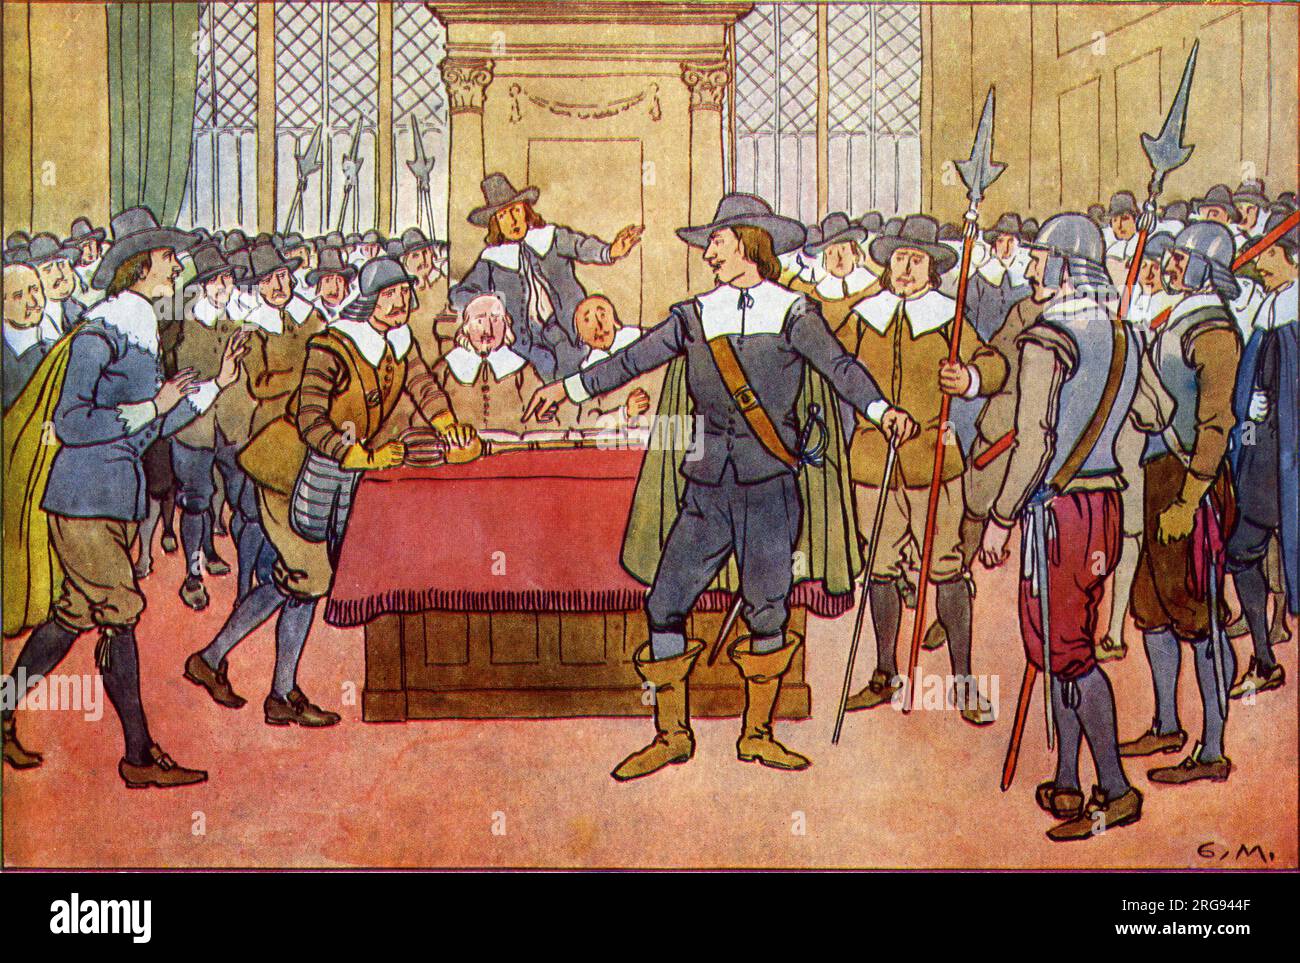 This illustration shows Cromwell asserting his authority in dissolving the English 'Rump' Parliament on 20 April 1653. He is shown ordering the removal of the golden mace from Parliament. Stock Photo